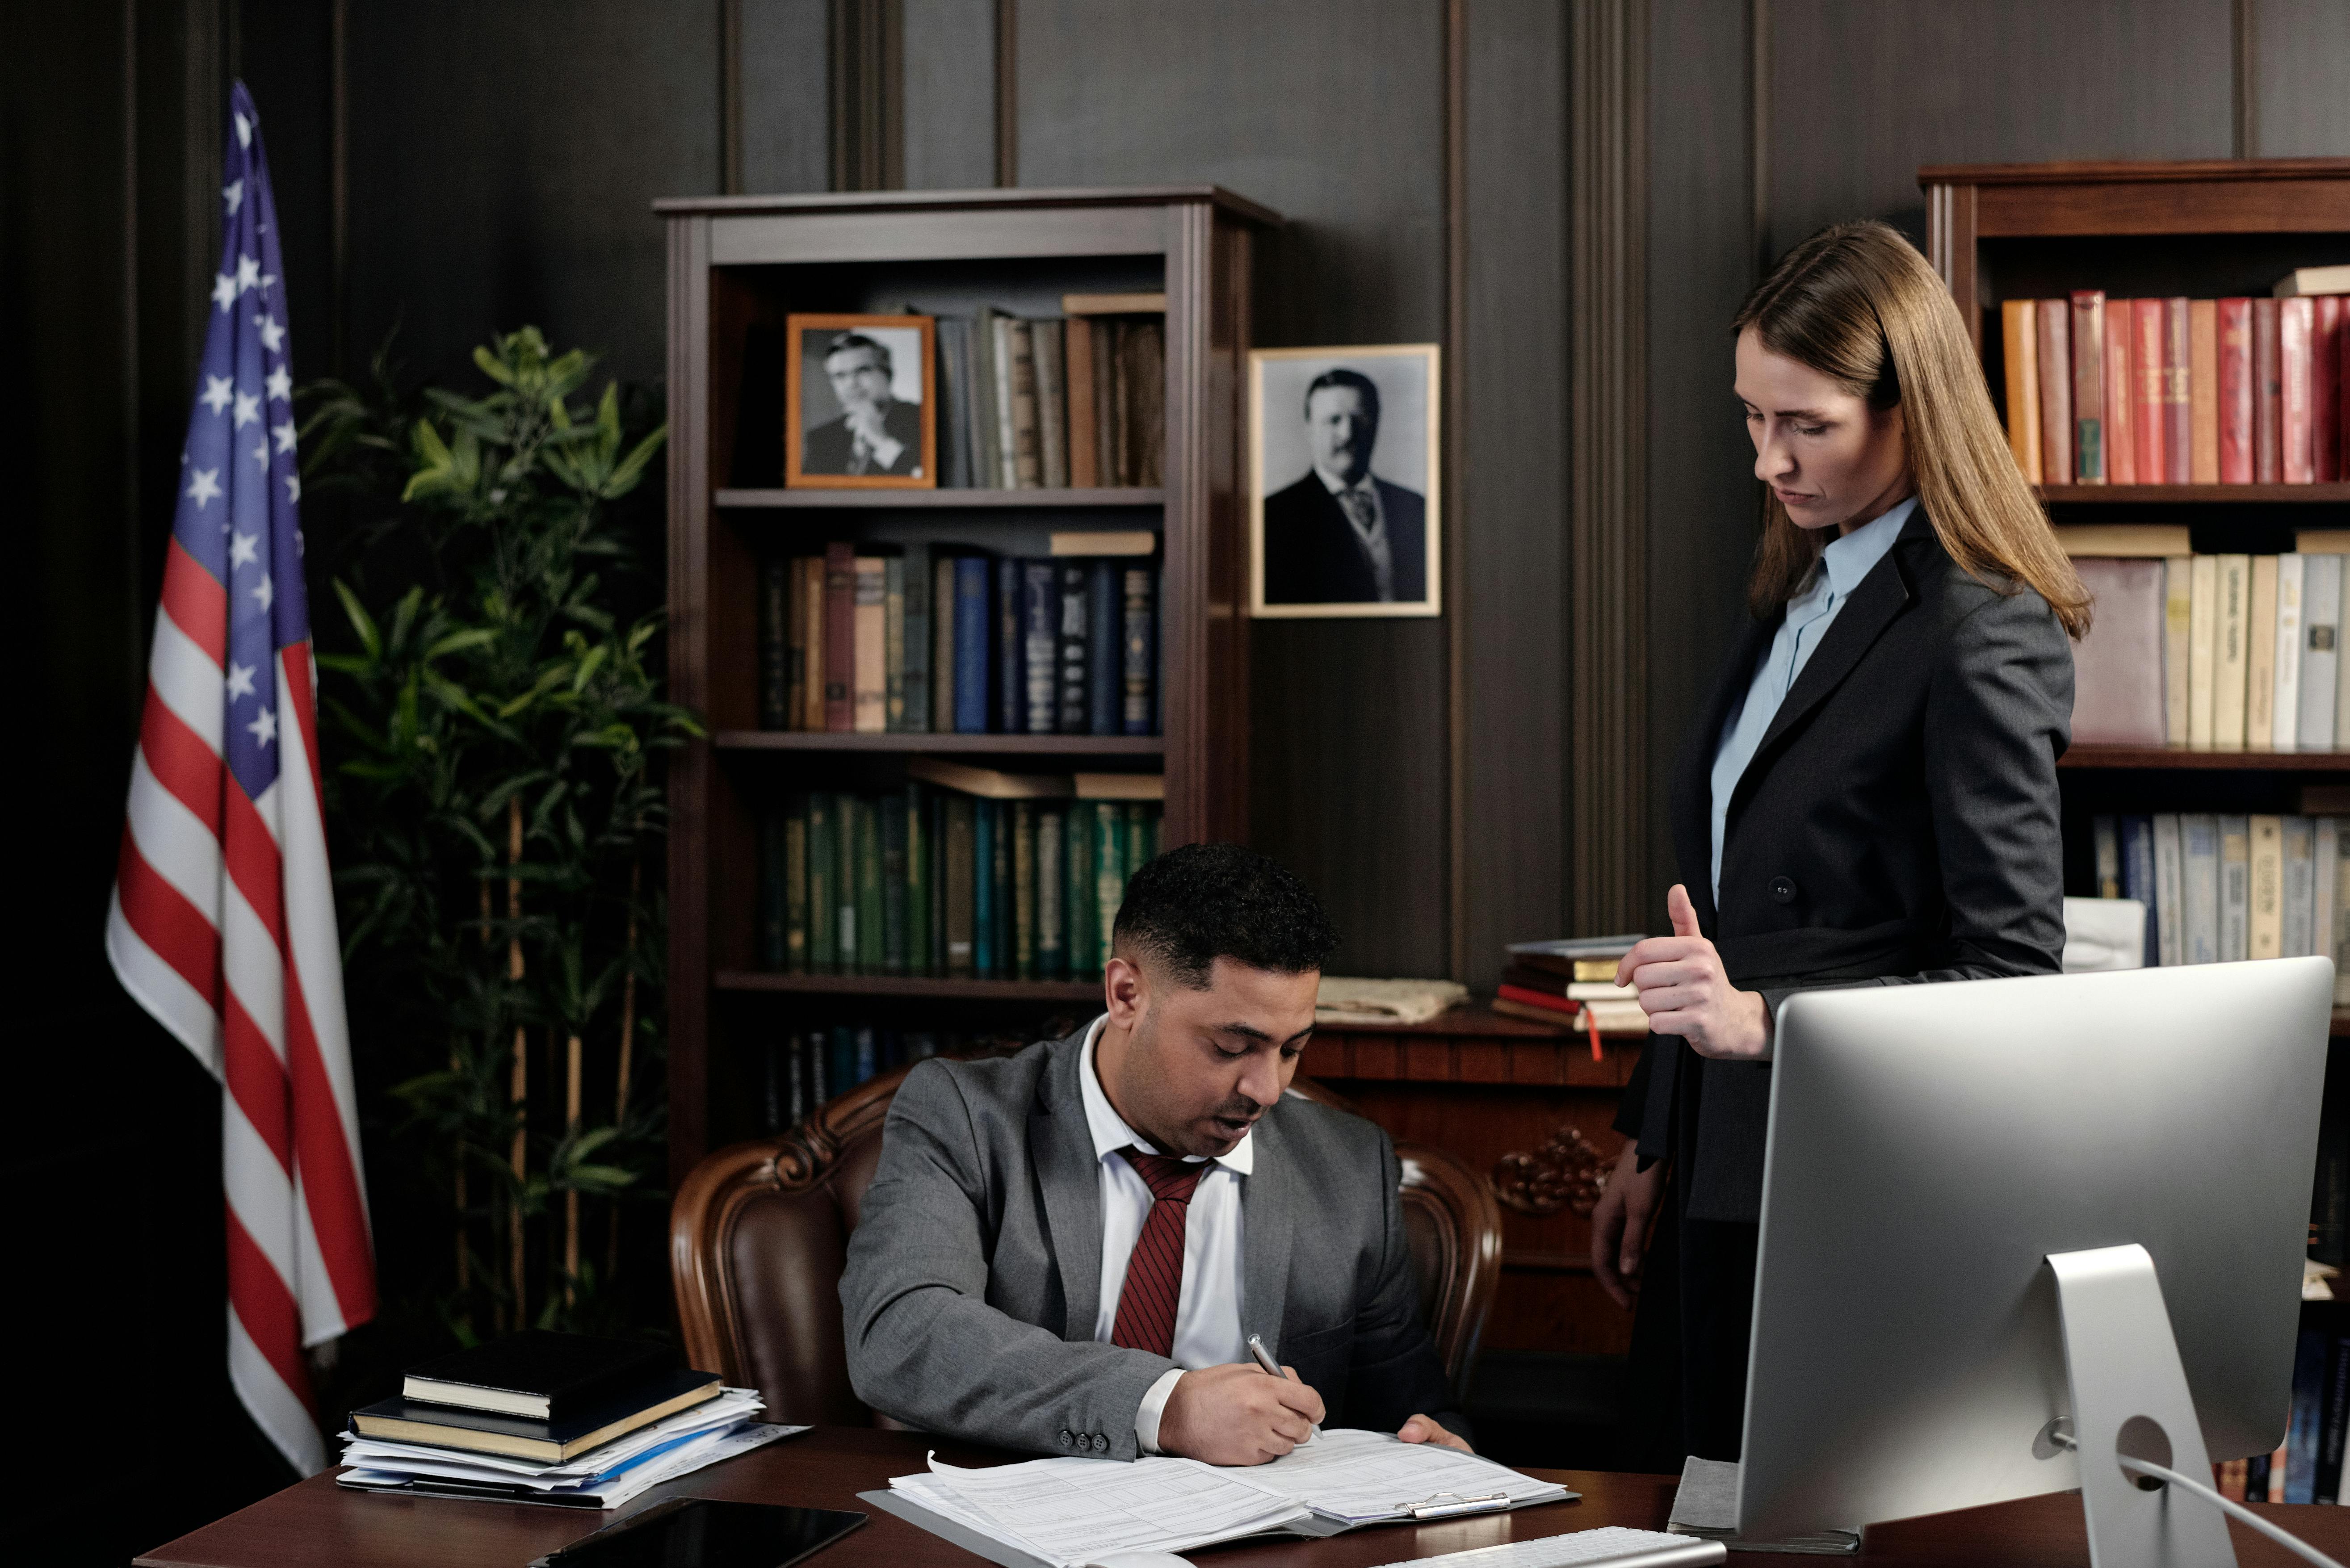 lawyers in an office looking at documents